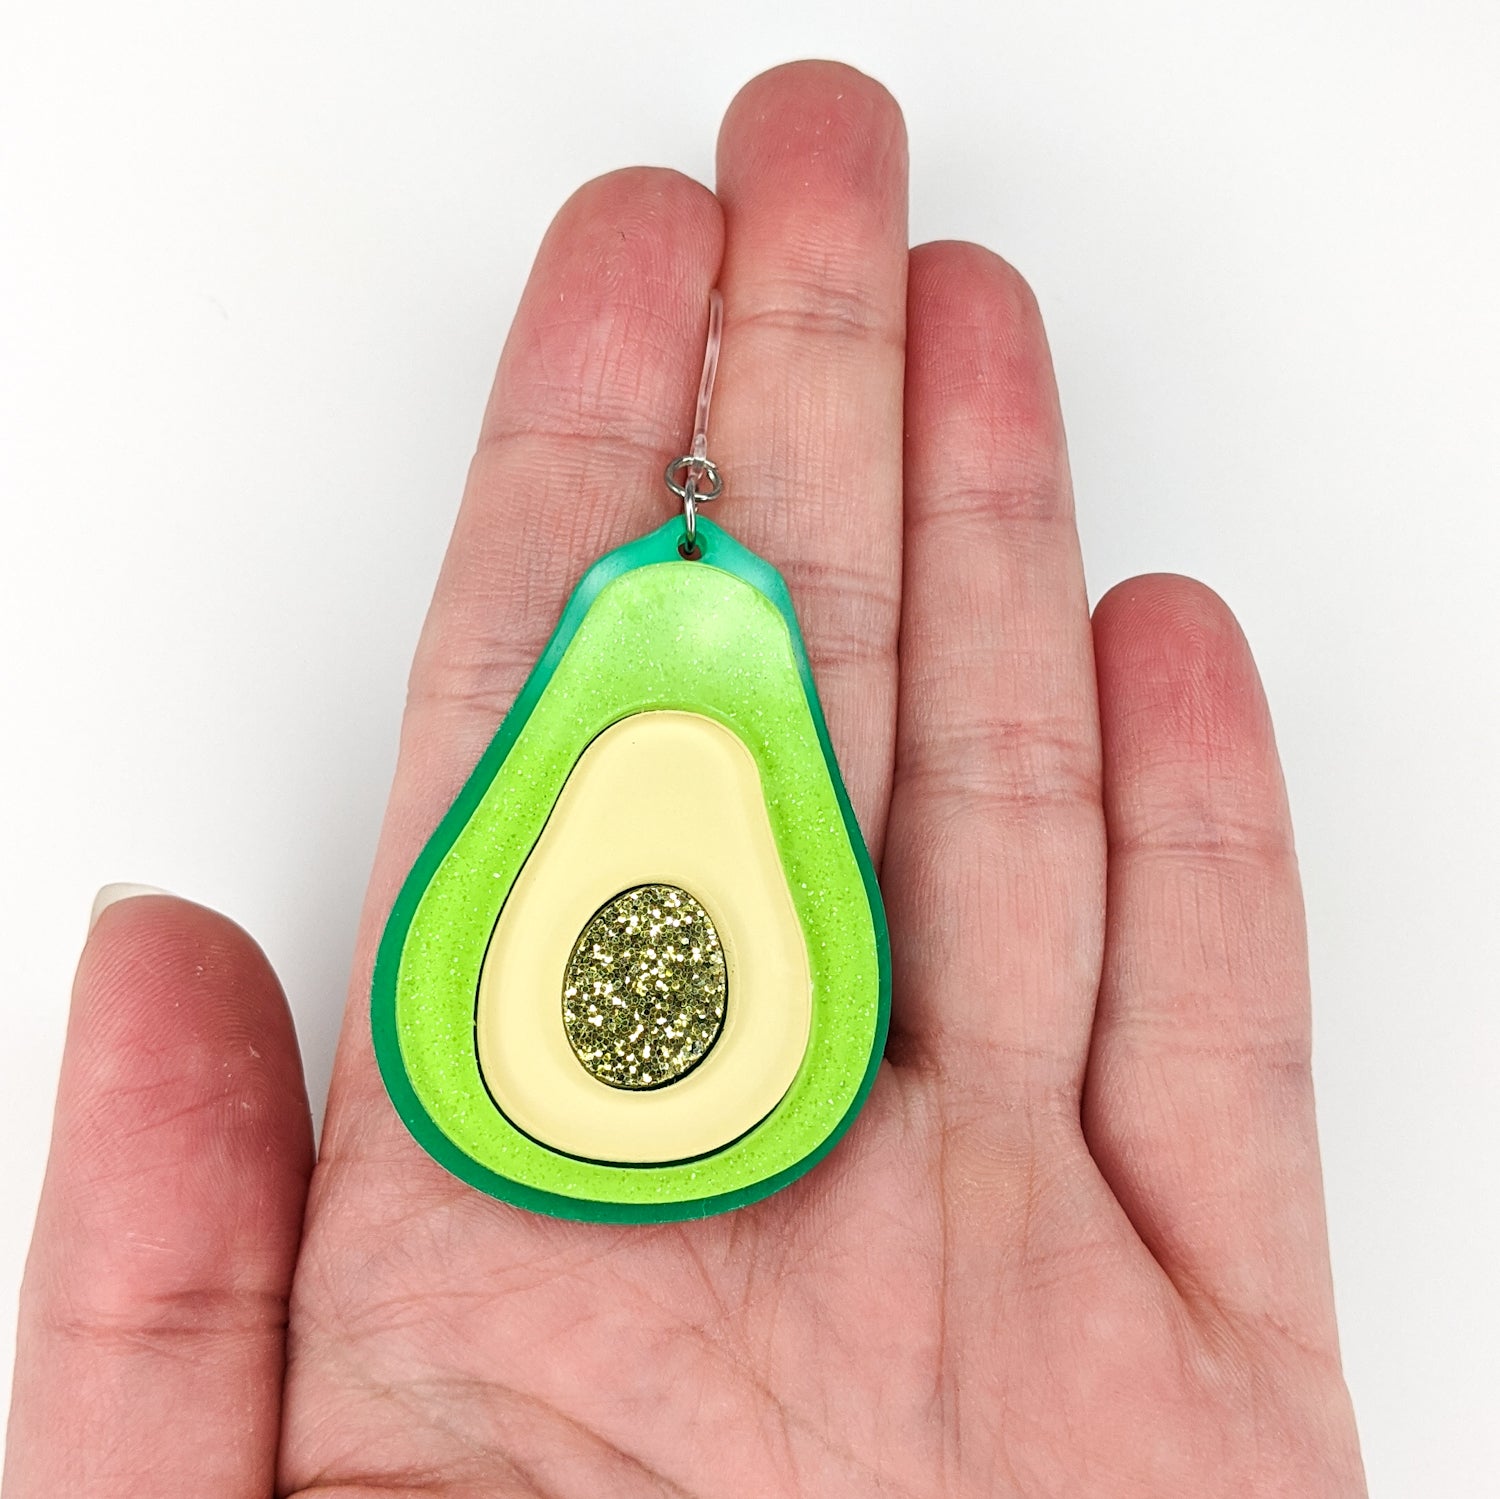 Exaggerated Avocado Earrings (Dangles) - size comparison hand